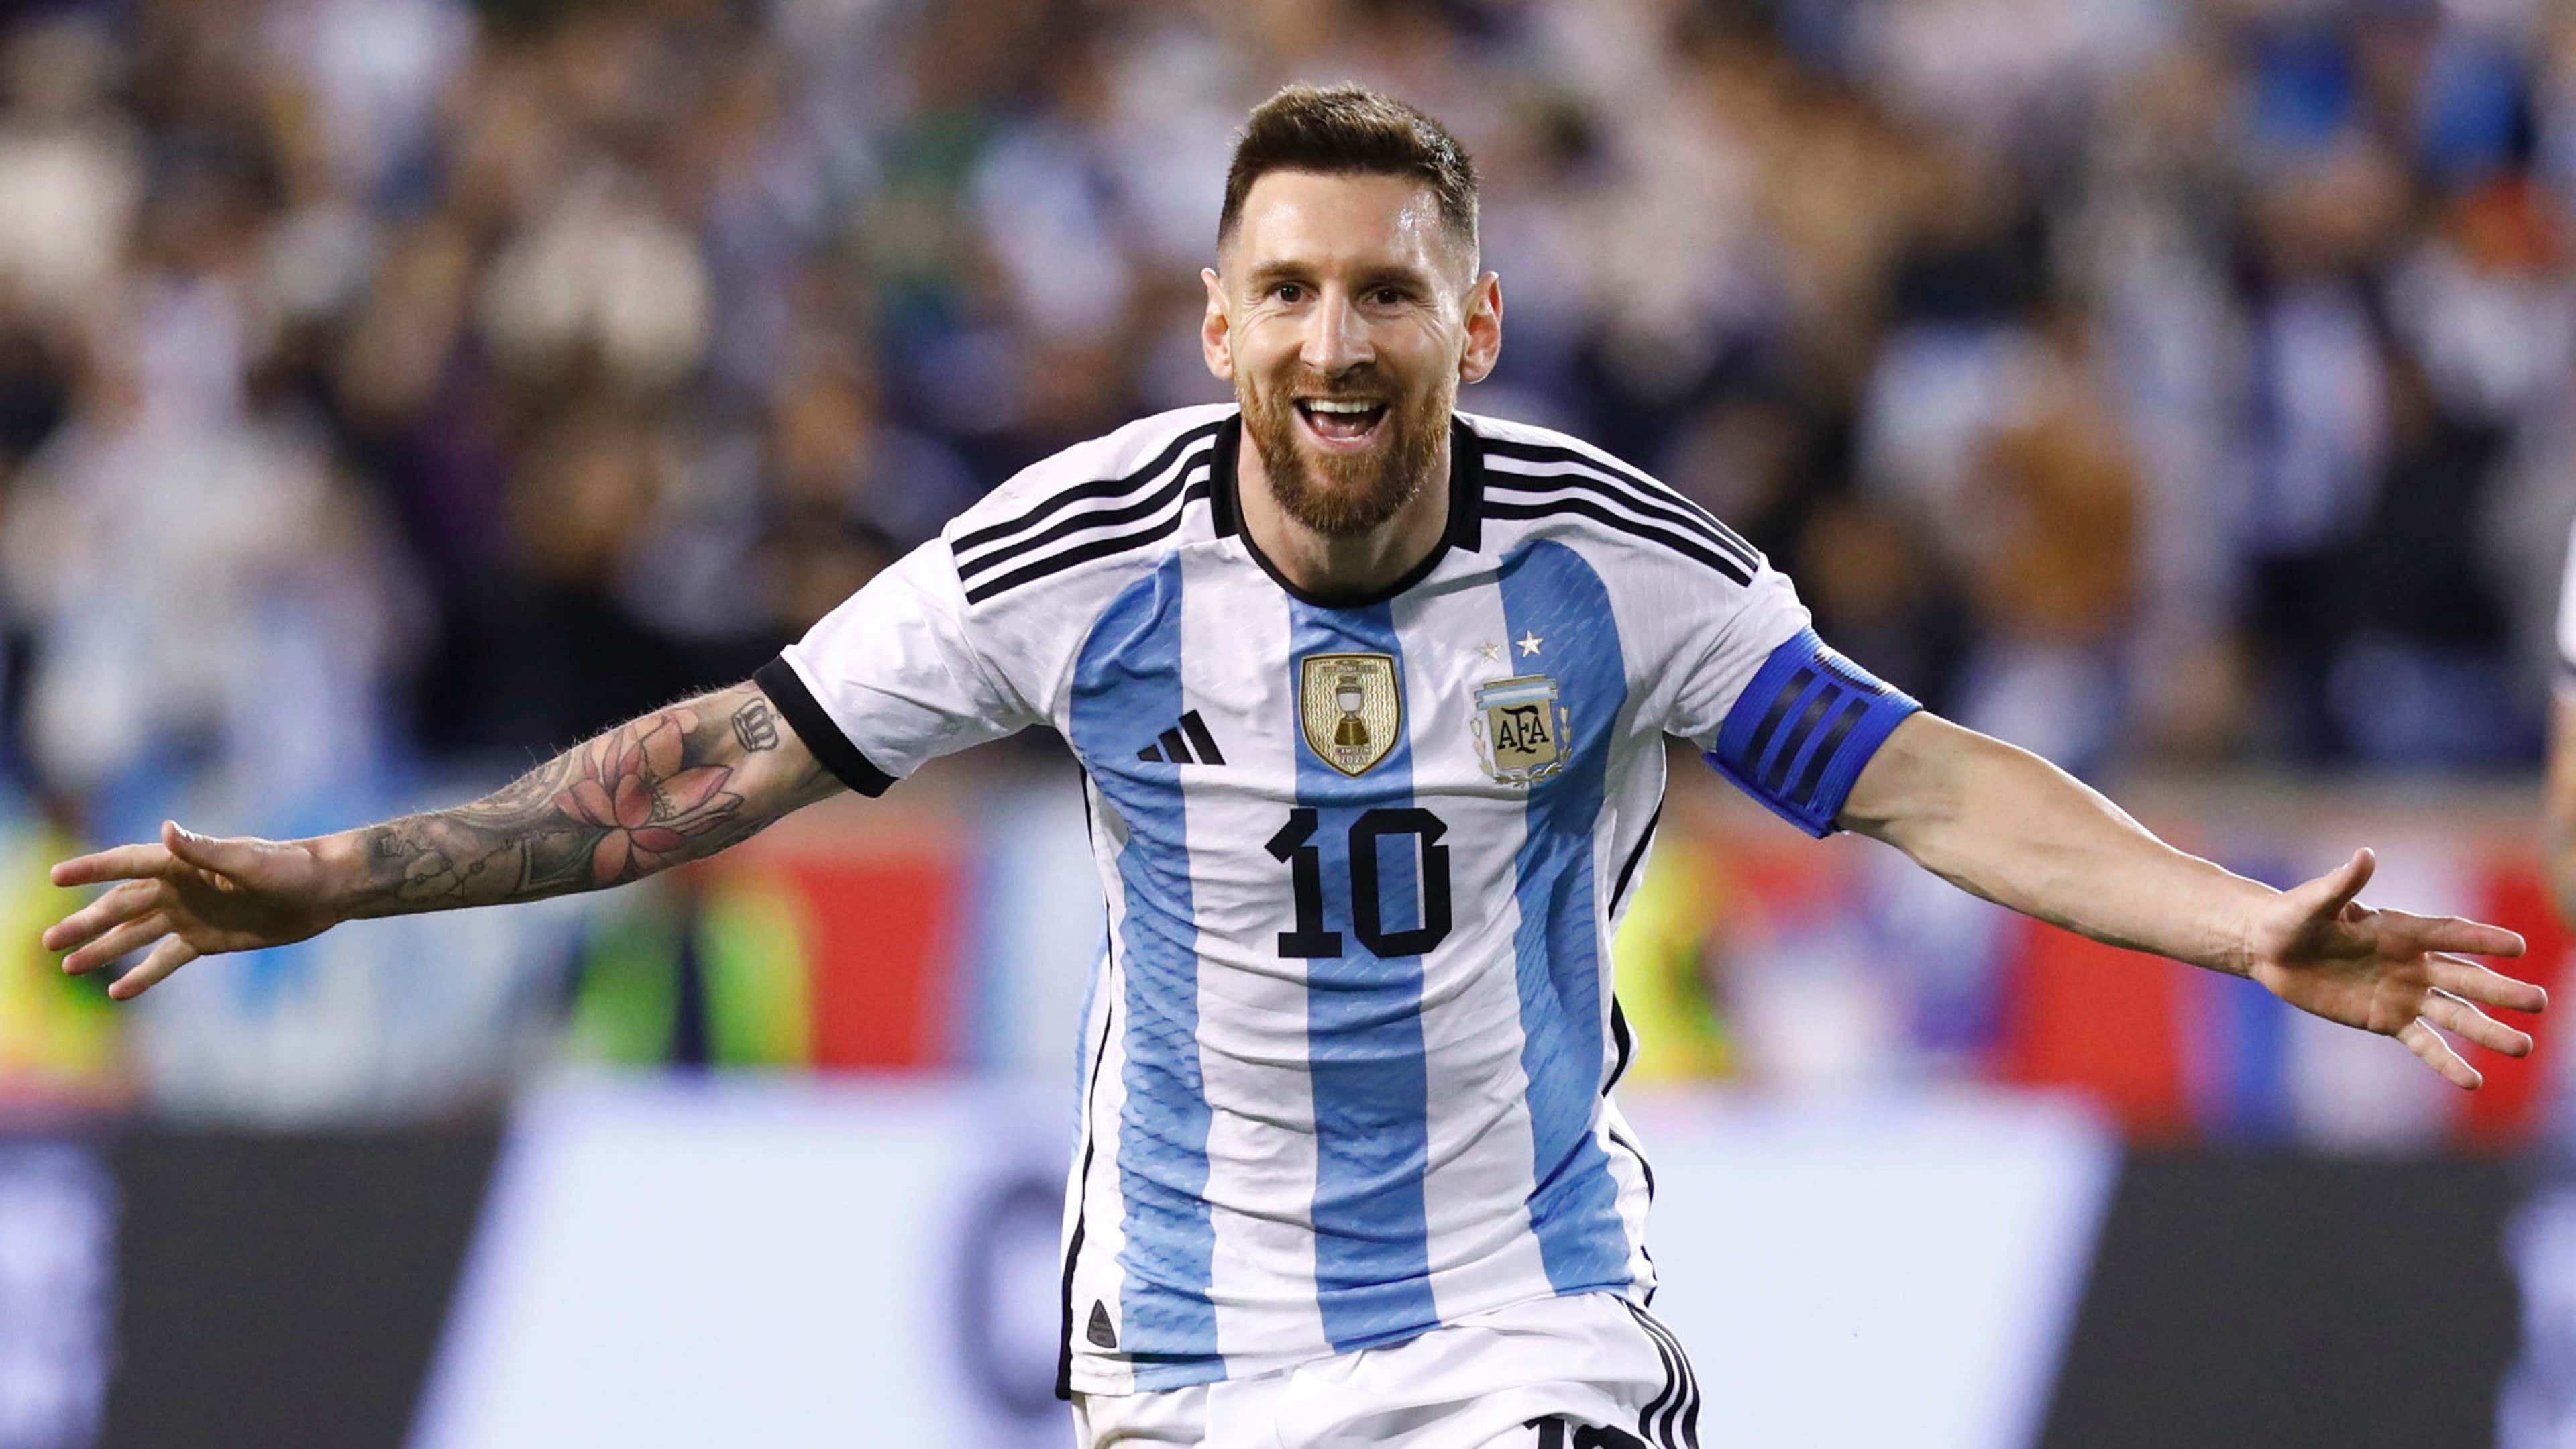 Lionel Messi 10 Argentina 2022 World Cup Winner Football 